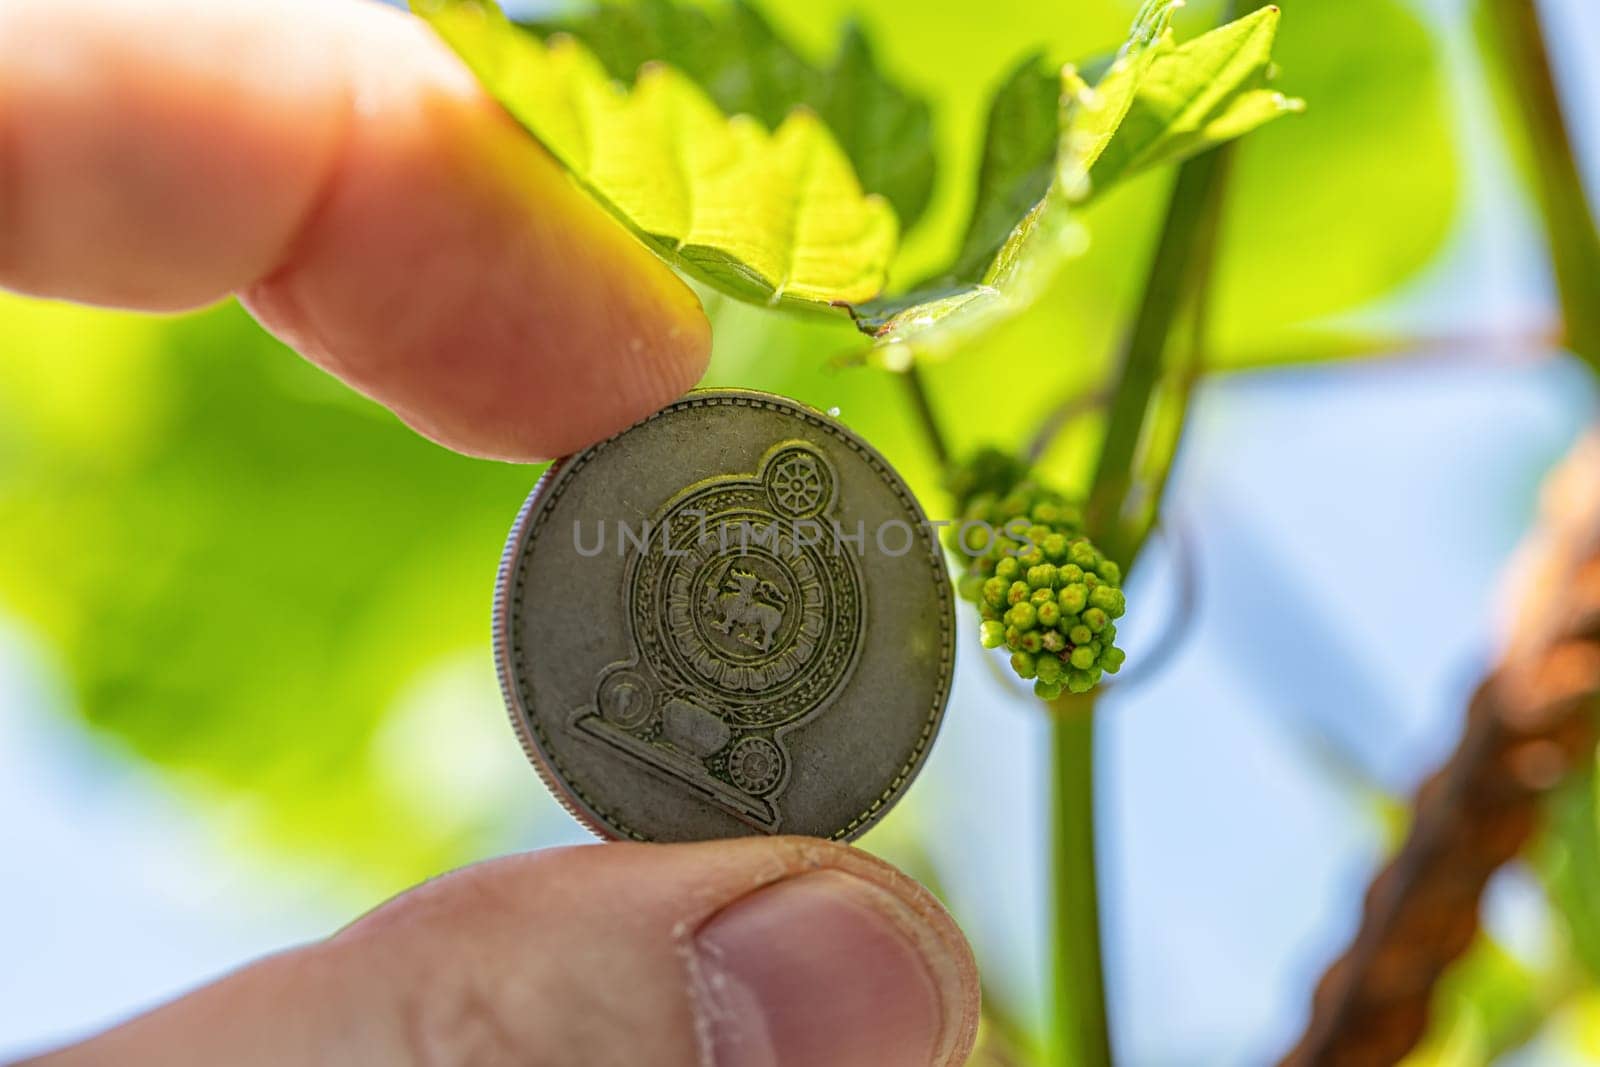 A very small grape brush on the background of a coin from Arab countries